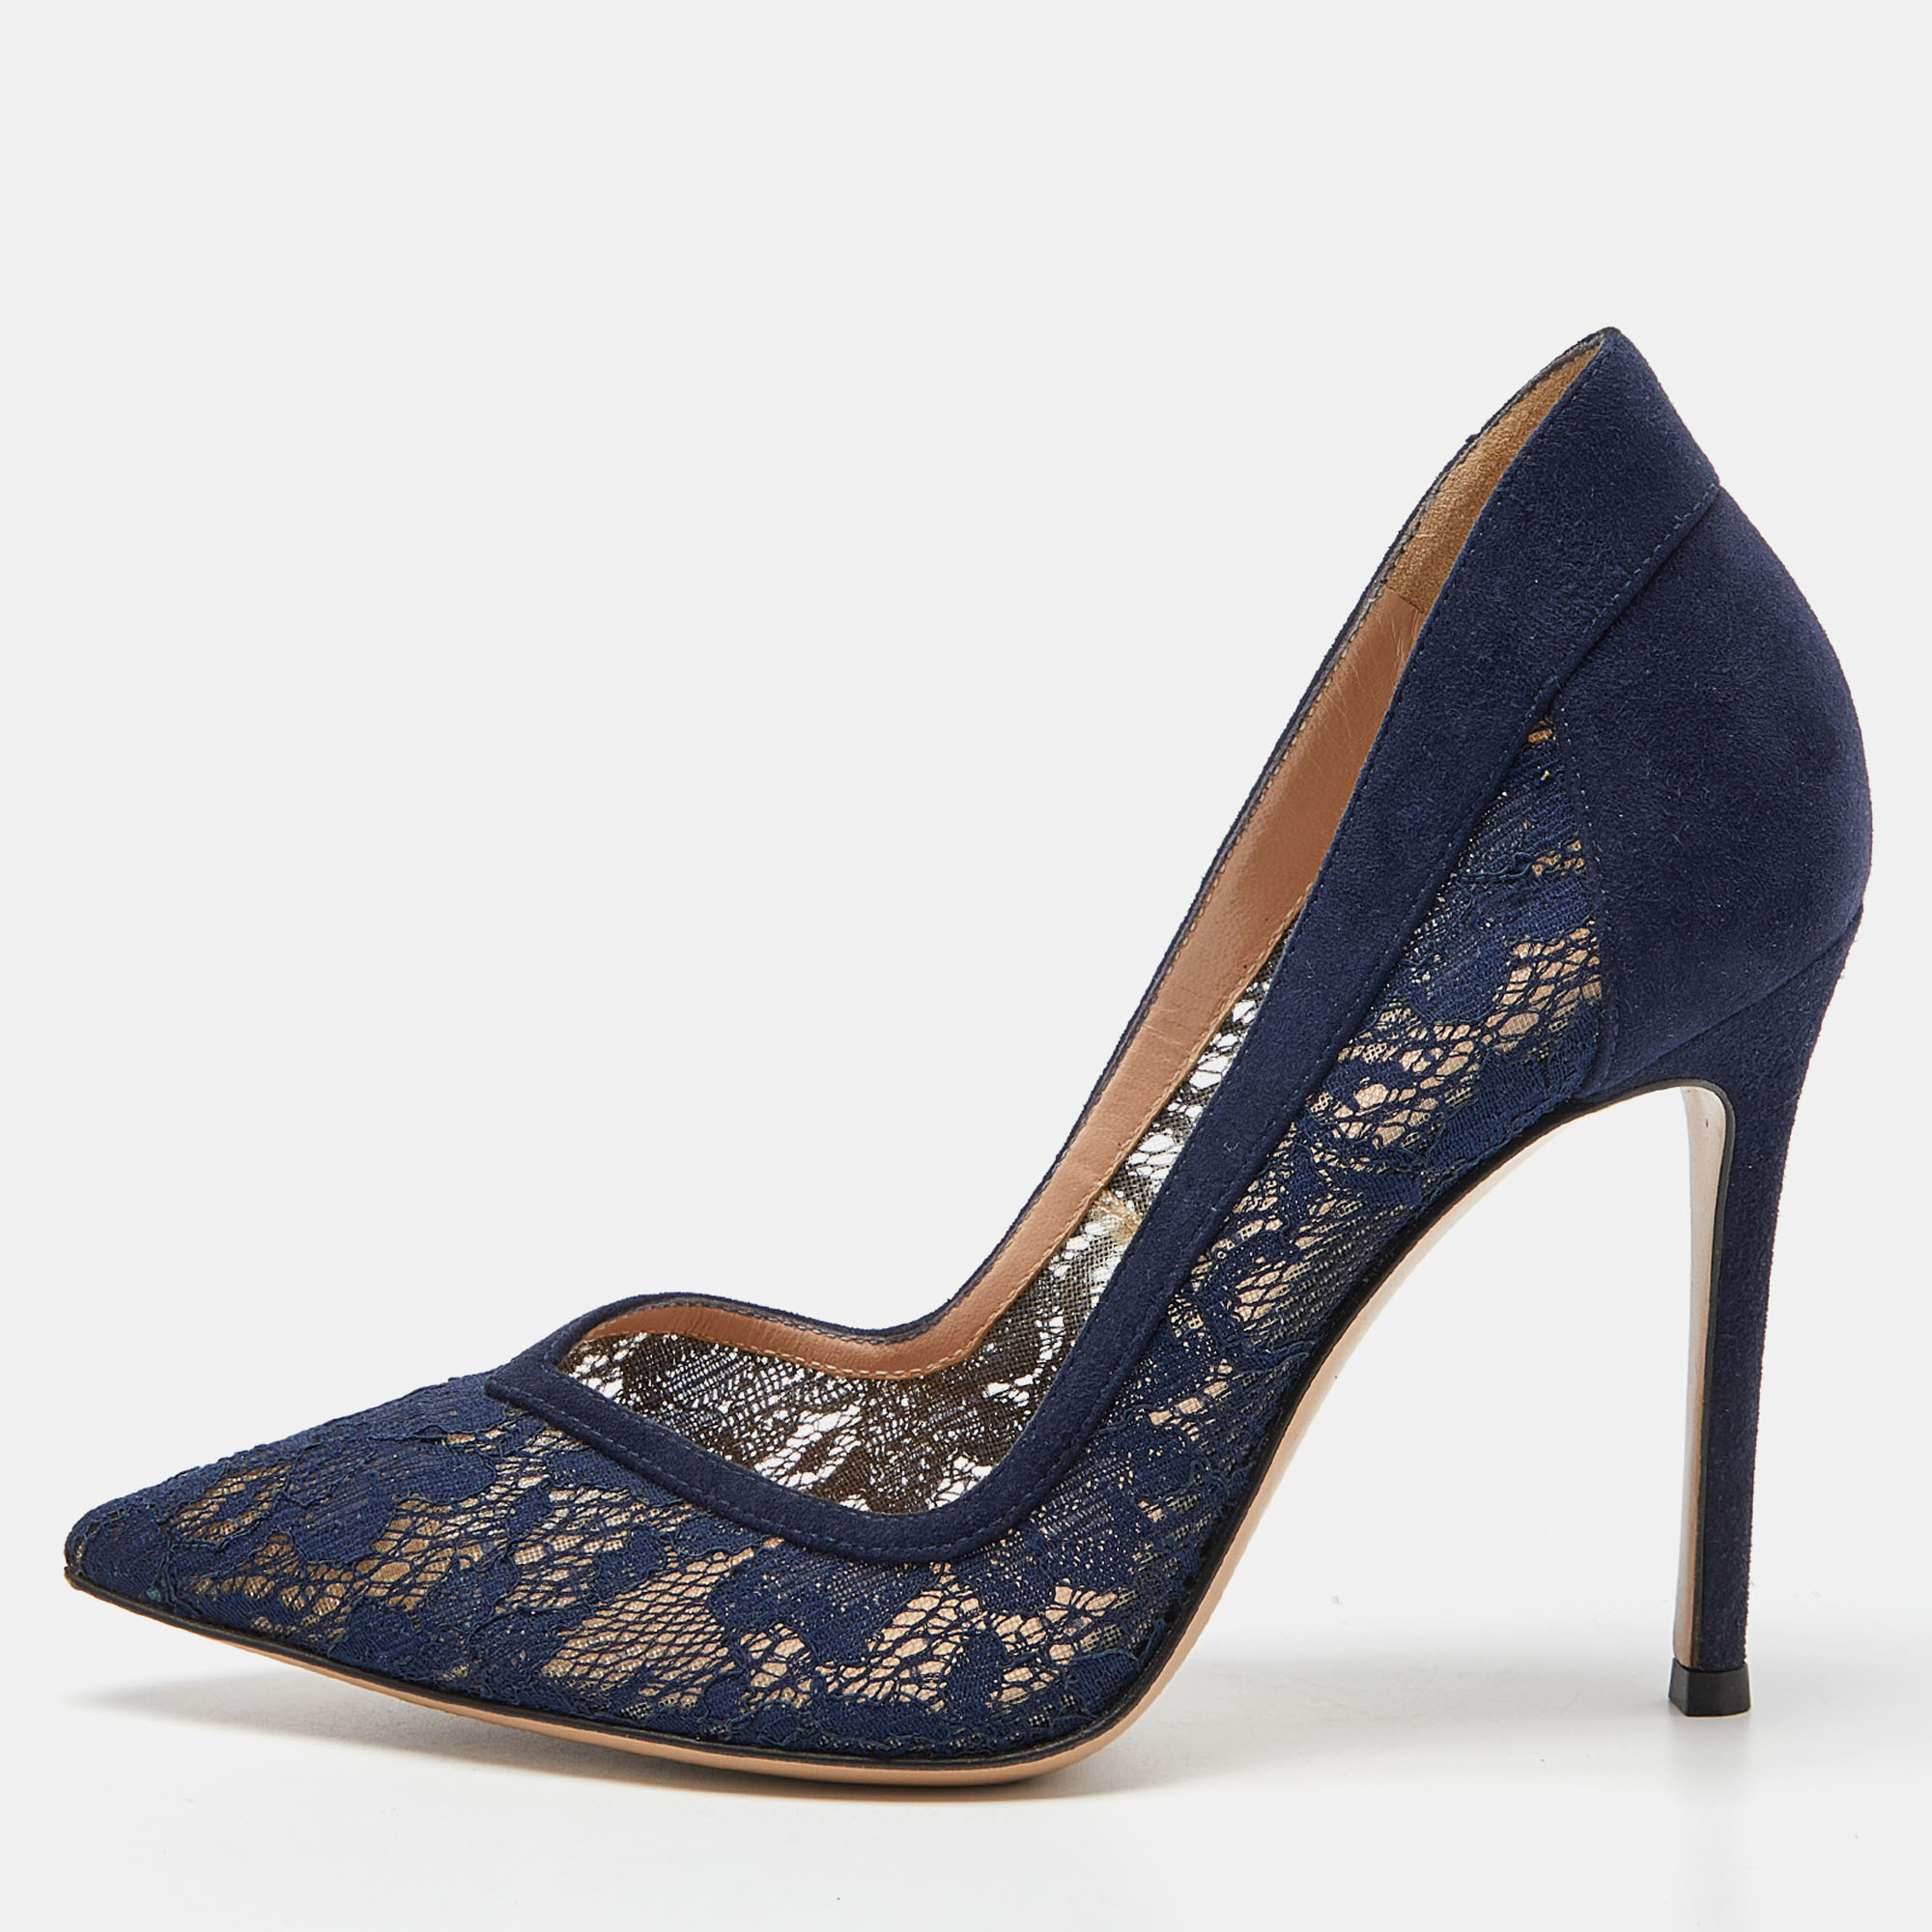 Pre-owned Gianvito Rossi Navy Blue Lace And Suede Pumps Size 36